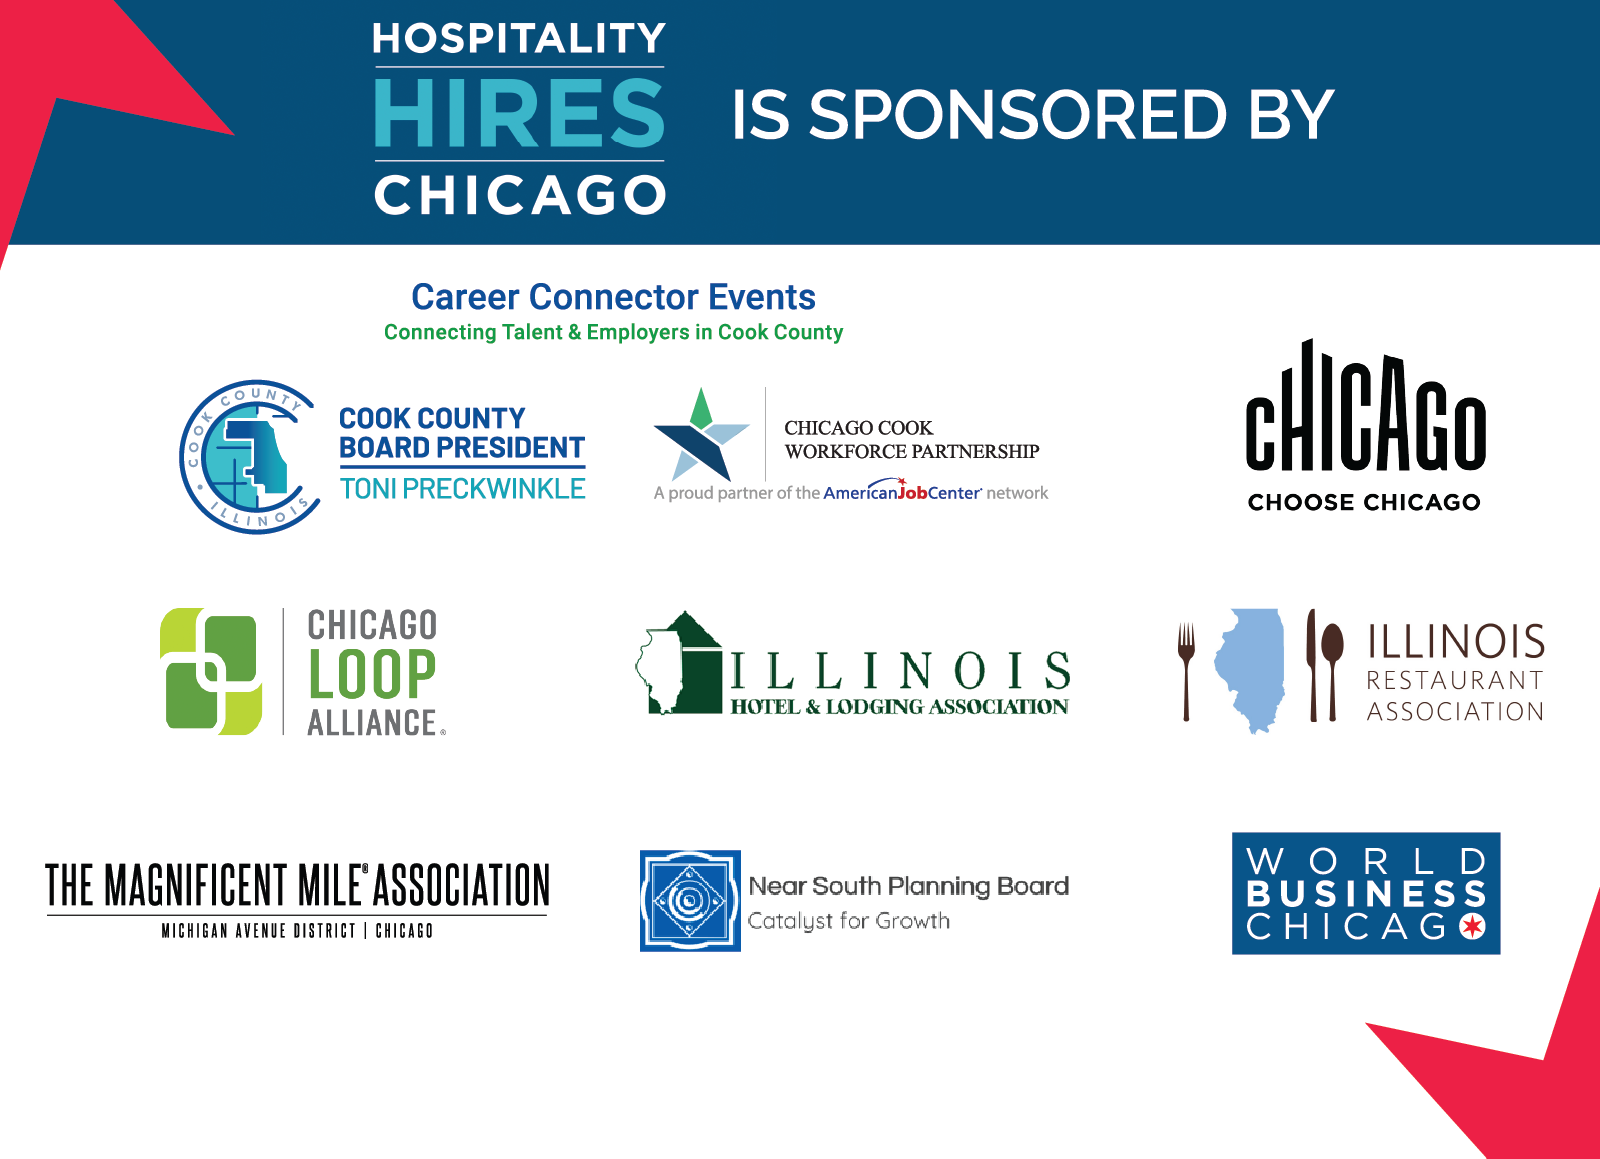 Hospitality Hires Chicago is Sponsored By Career Connector Events: Connecting Talent & Employers in Cook County. Cook County Board President Toni Preckwinkle, Chicago Cook Workforce Partnership. Choose Chicago. Chicago Loop Alliance. Illinois Hotel & Lodging Association. Illinois Restaurant Association. The Magnificent Mile Association. Near South Planning Board. World Business Chicago.